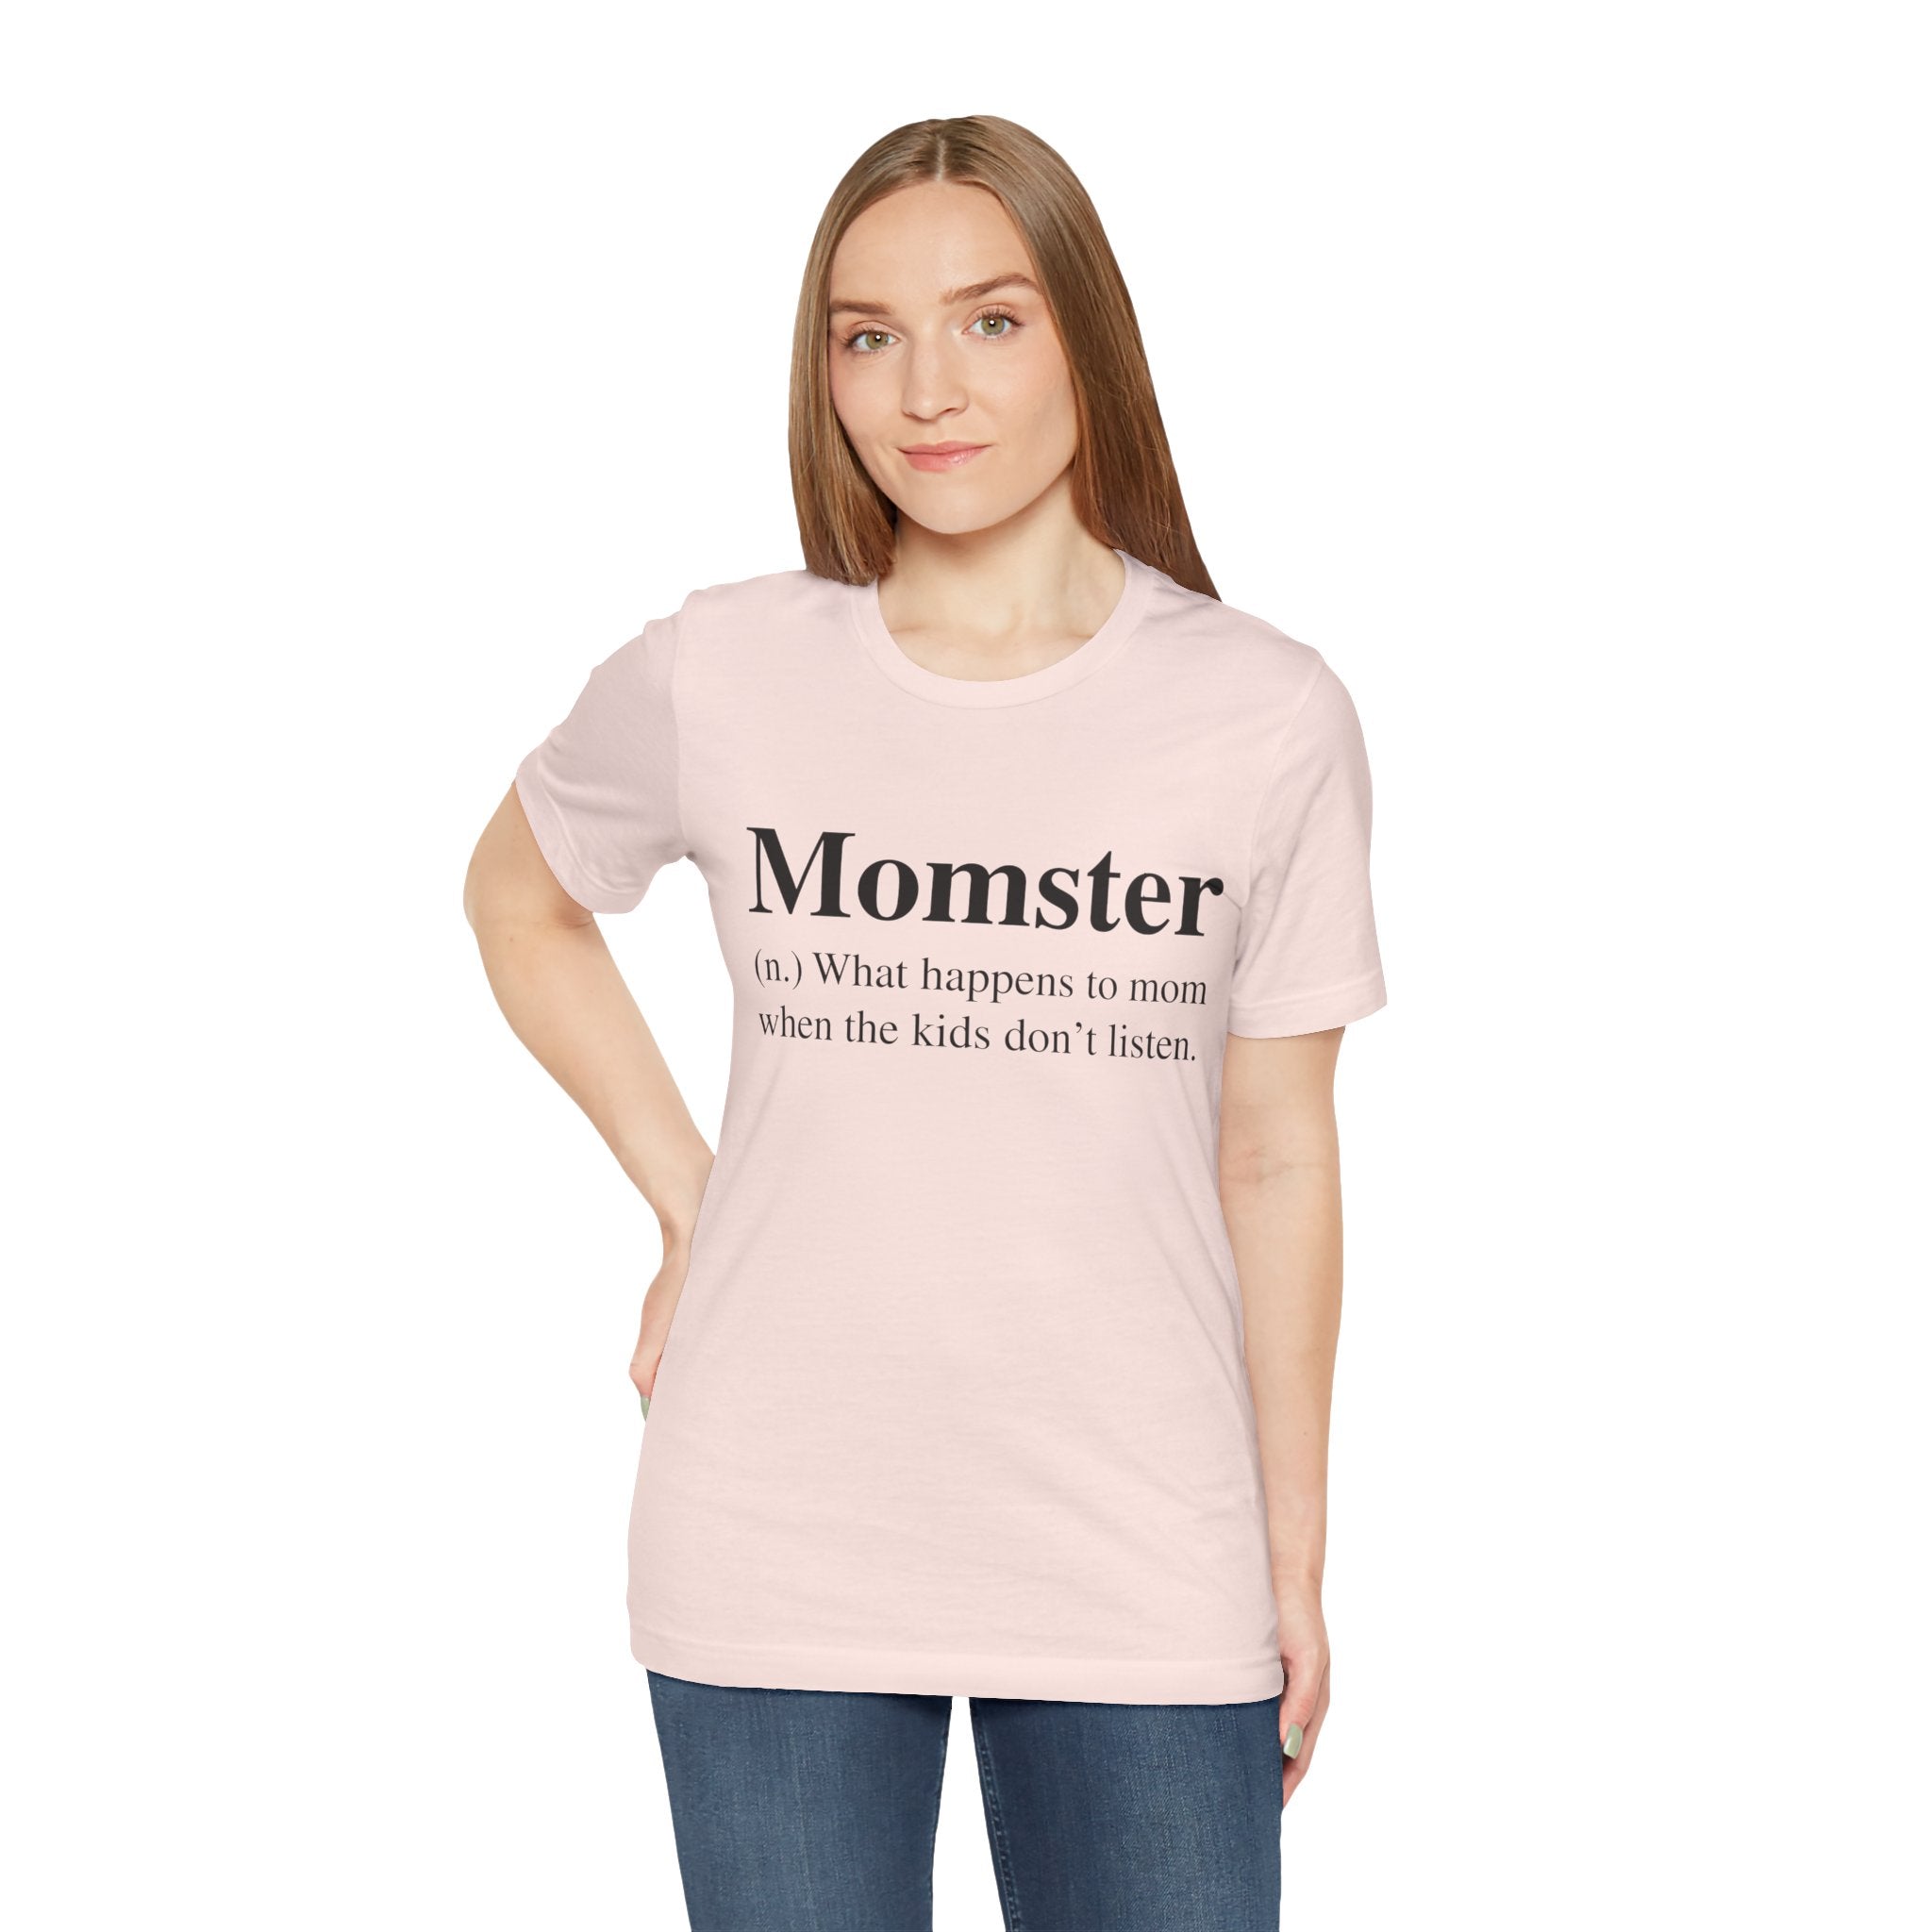 Woman in a Momster T-Shirt with the definition "what happens to mom when the kids don't listen" printed on it.